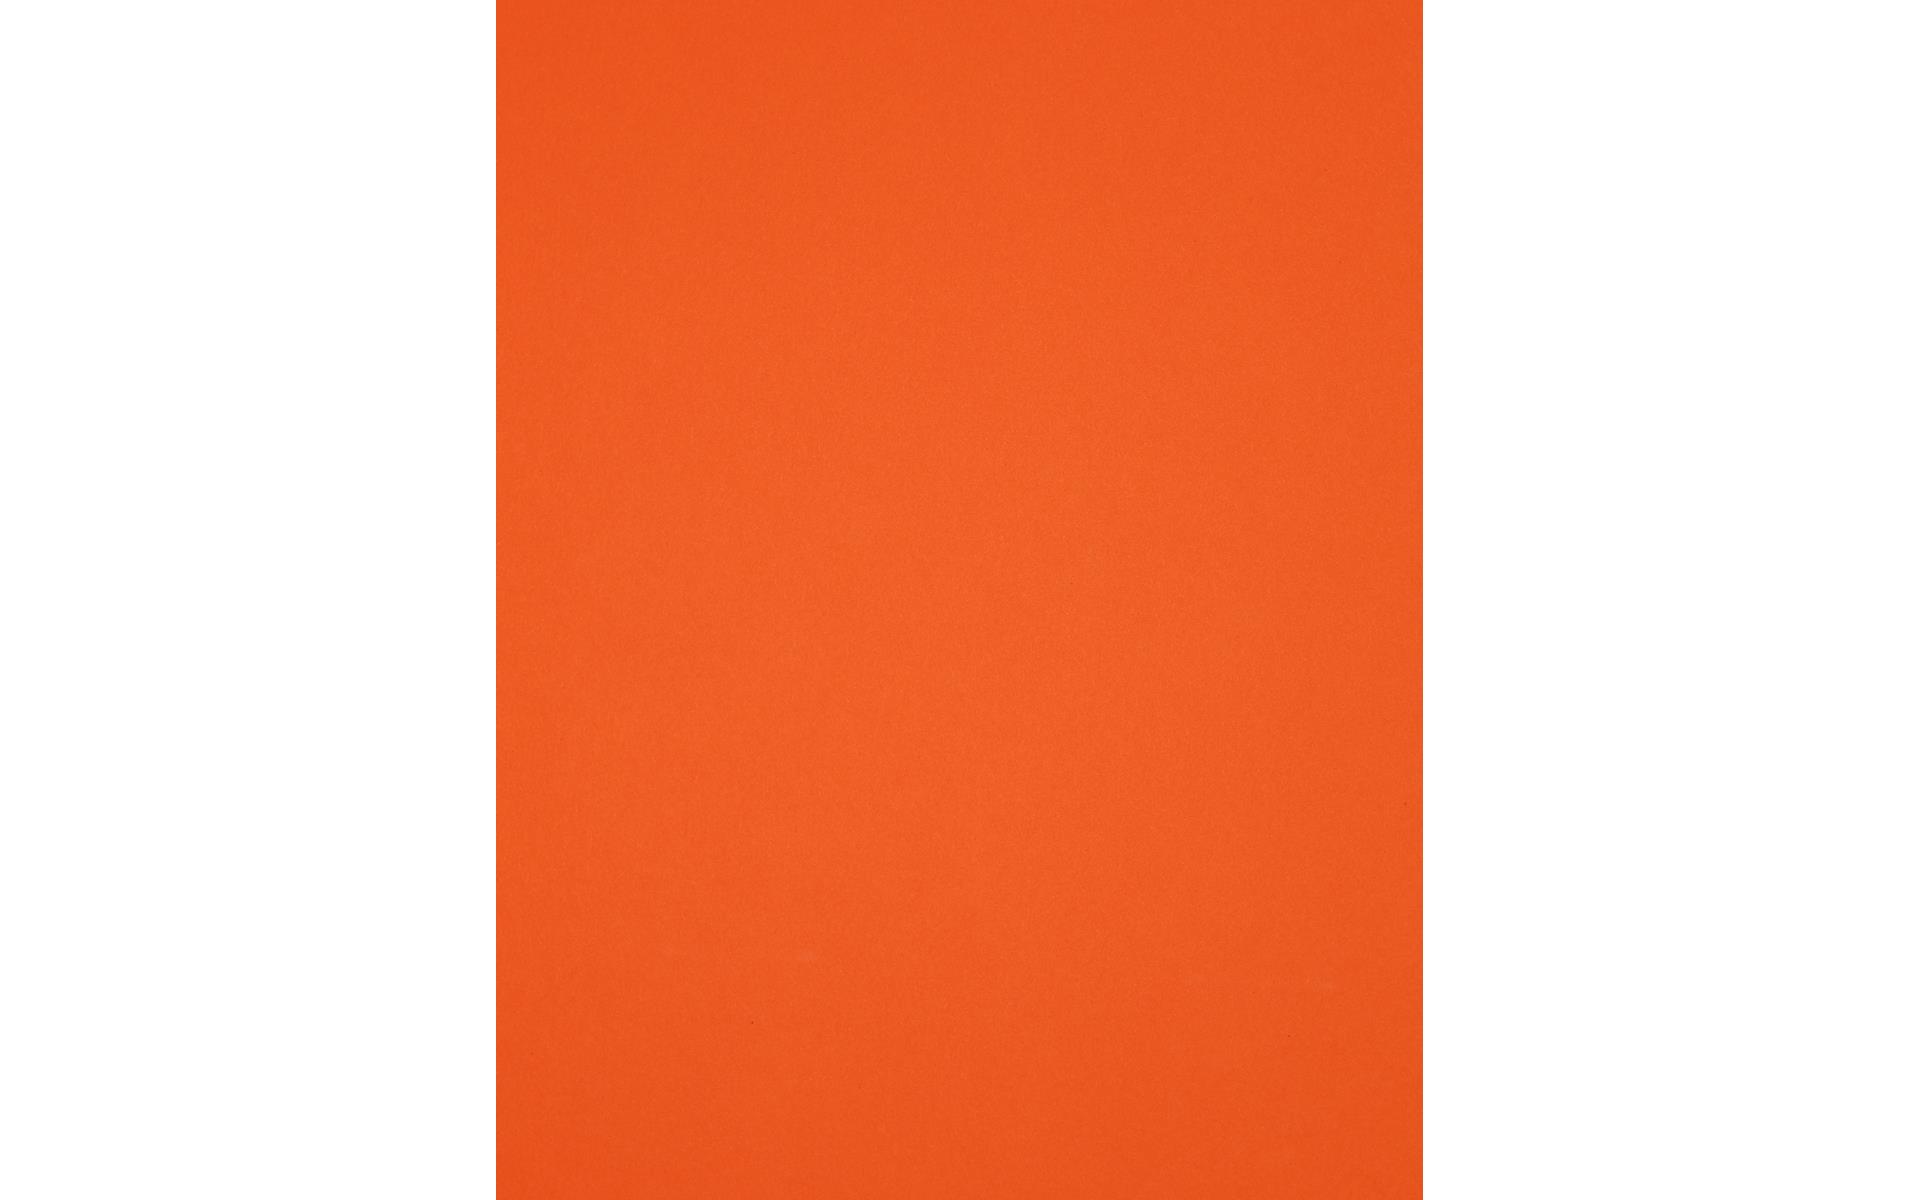 PA Paper Accents Smooth Cardstock 8.5 x 11 Orange, 65lb colored cardstock  paper for card making, scrapbooking, printing, quilling and crafts, 1000  piece box